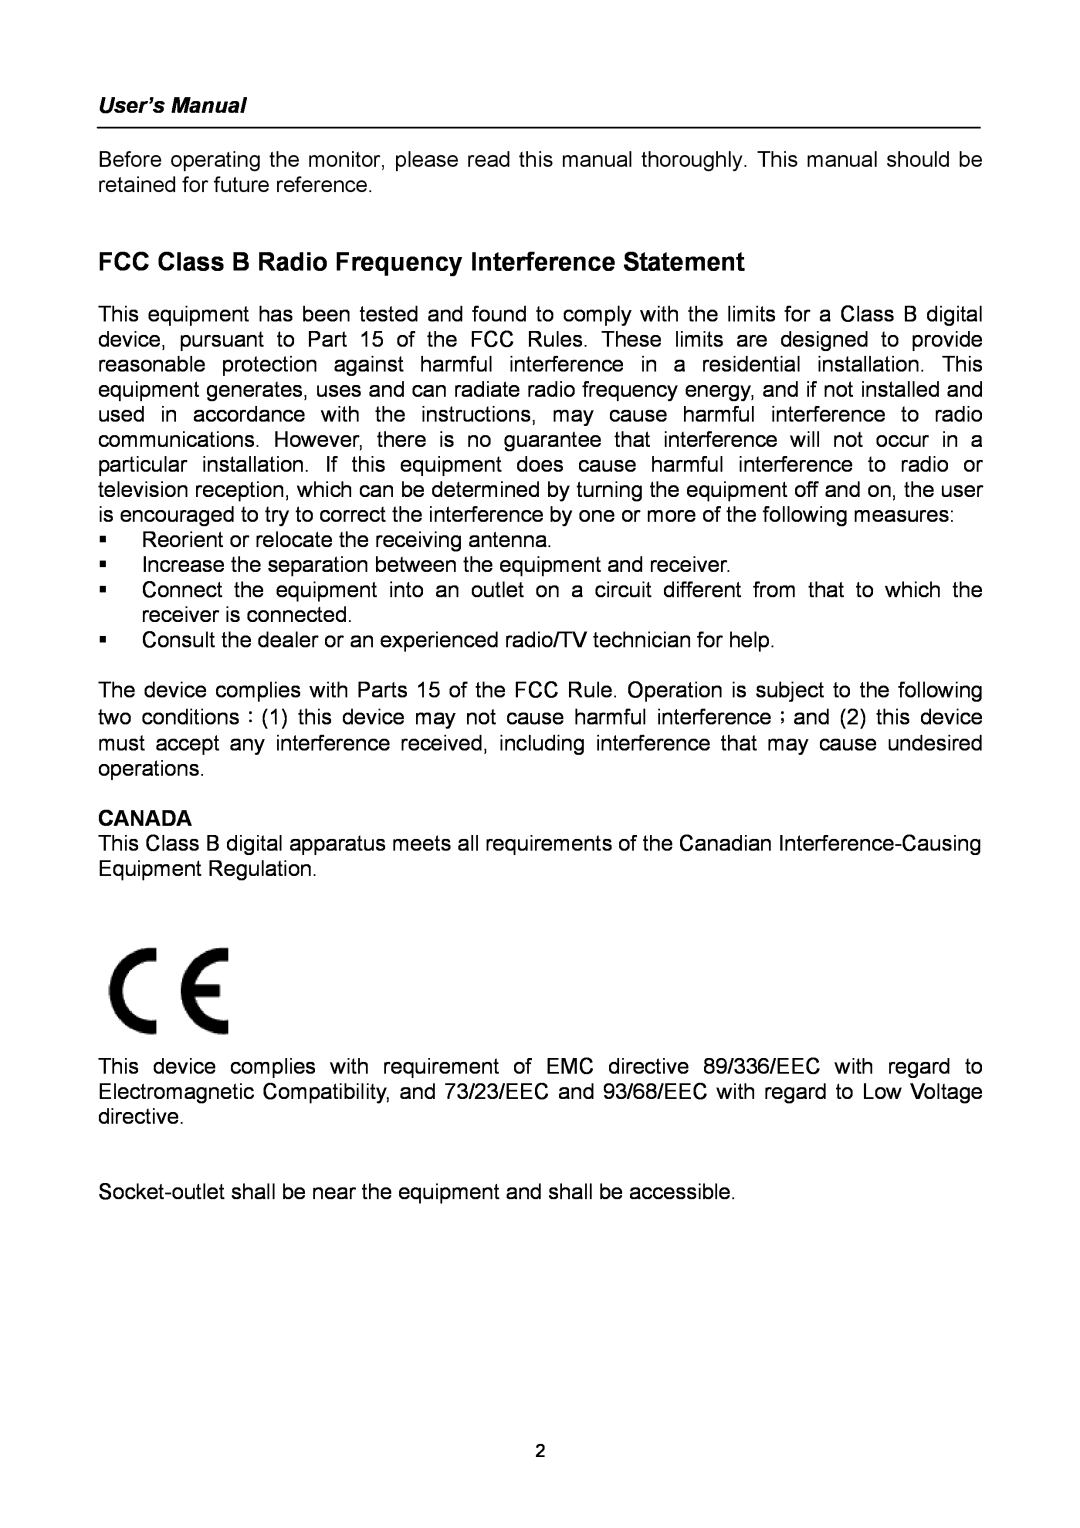 Hanns.G HG281 user manual FCC Class B Radio Frequency Interference Statement, User’s Manual 